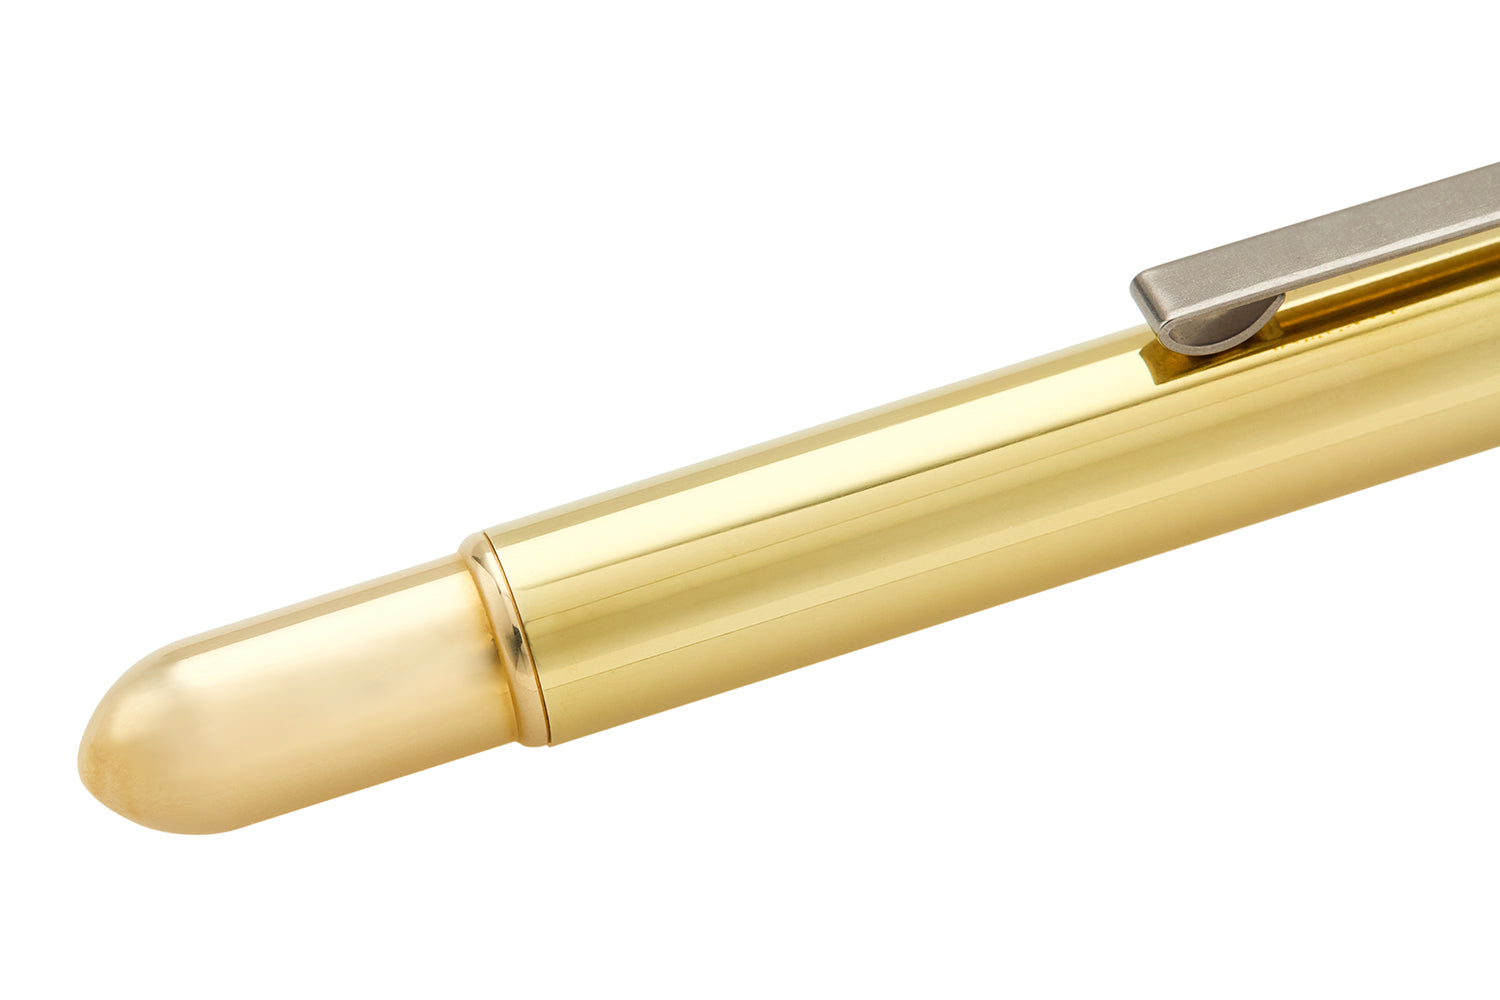 Introducing the Traveler's Brass Fountain Pen, Intrigued by the Traveler's Brass  Fountain Pen and want to learn more? Check out our latest video!